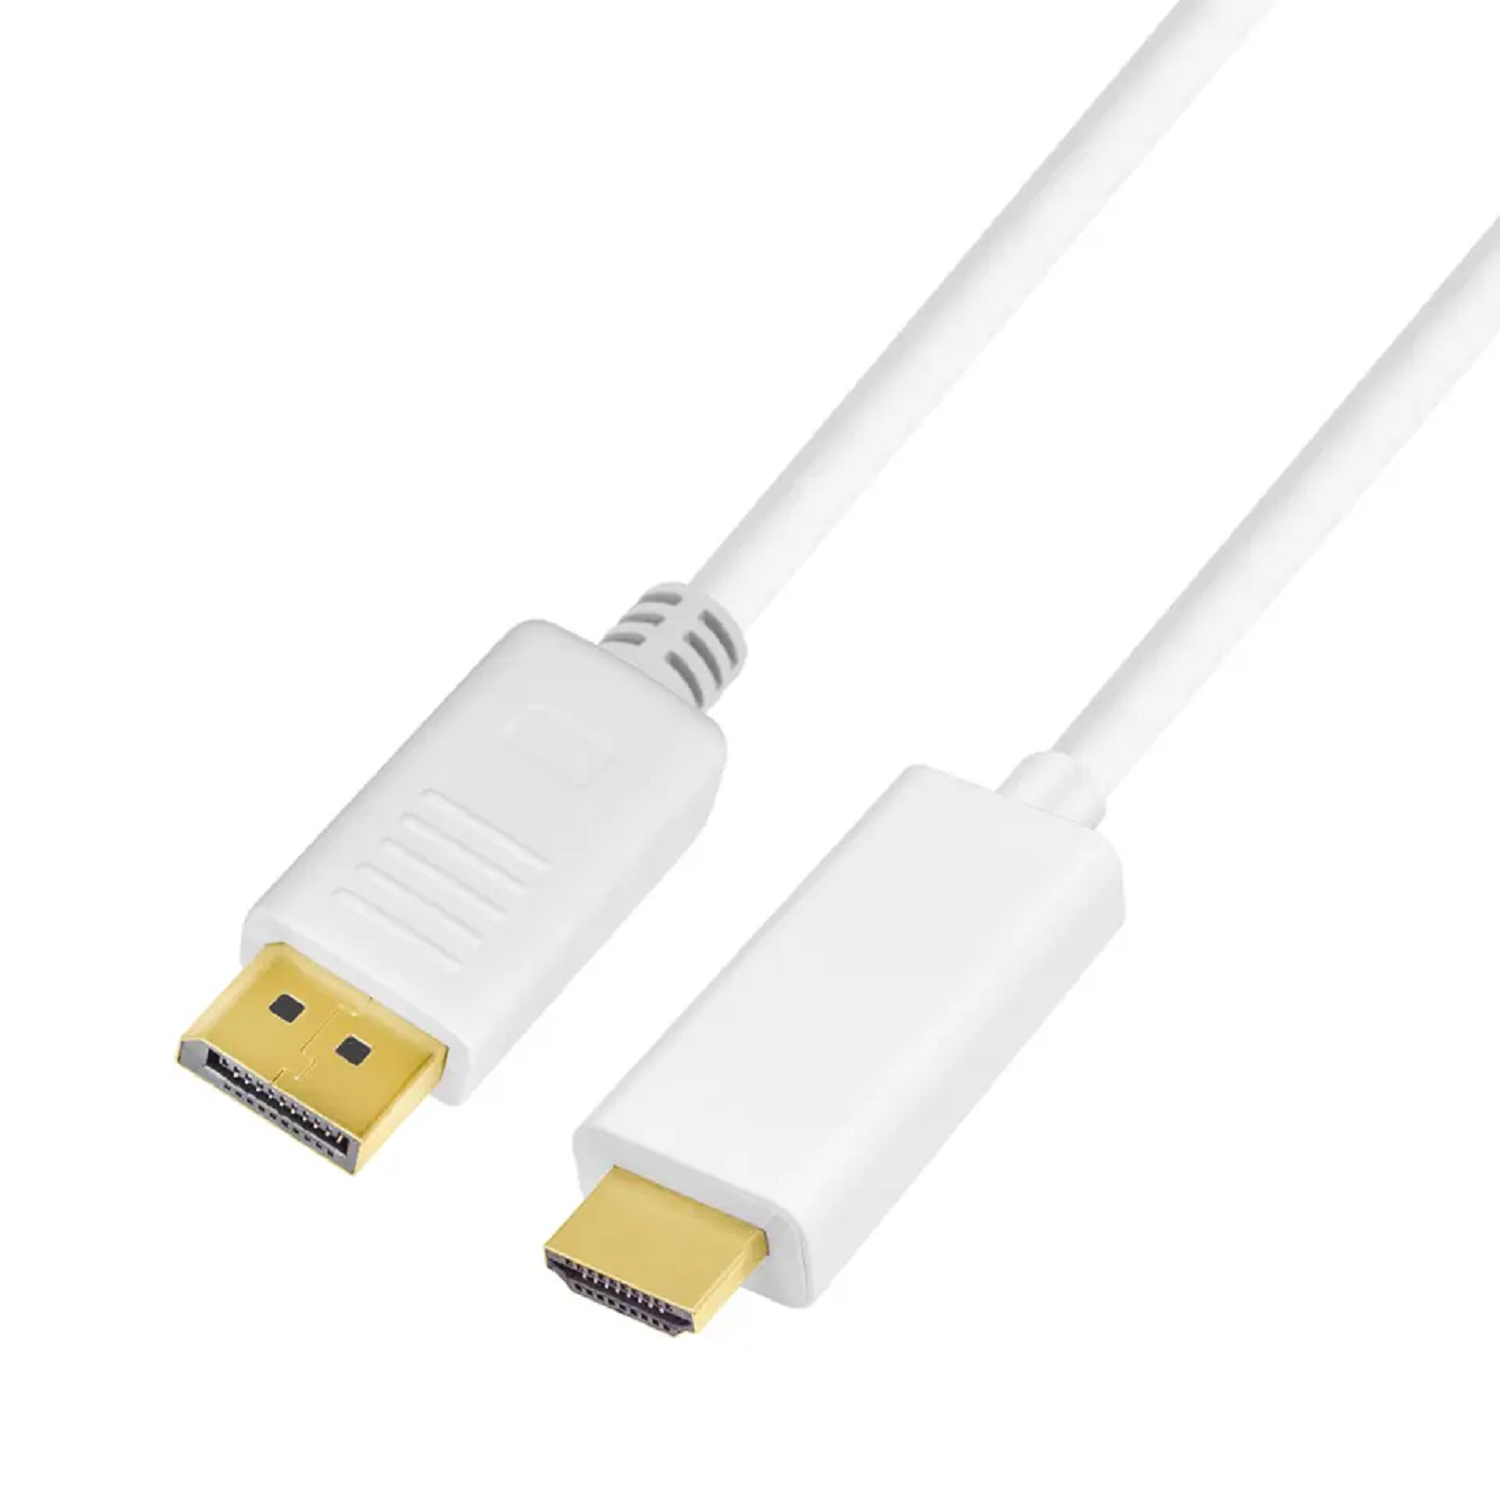 81 DisplayPort (DP) to HDMI Cable